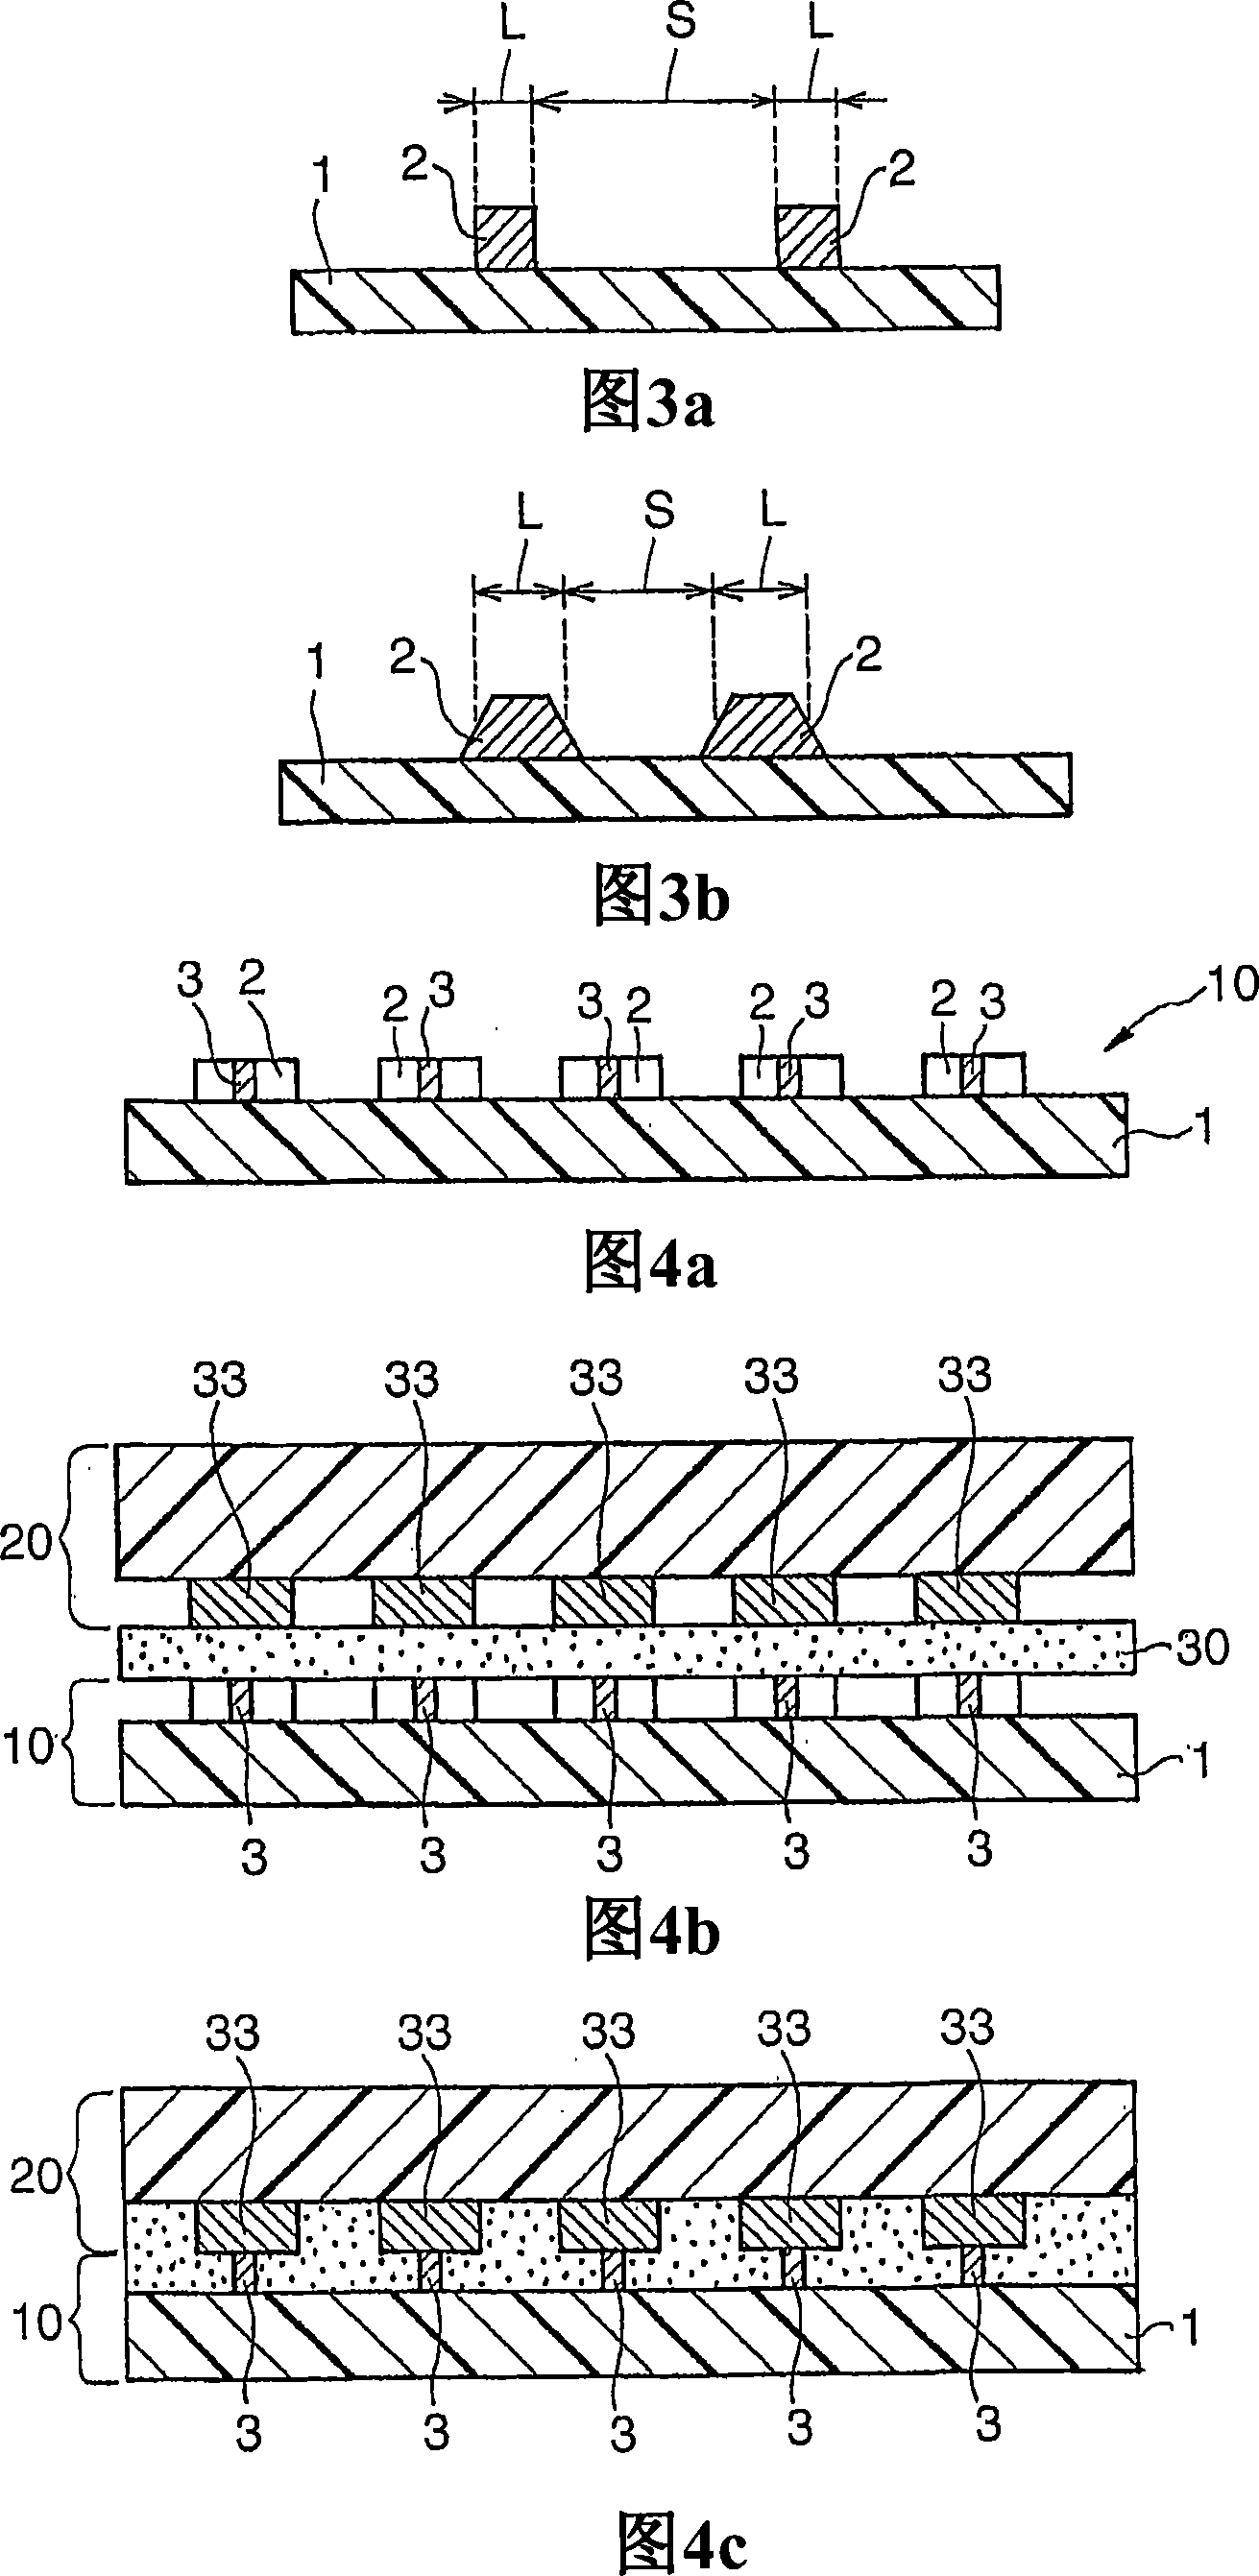 Method for connecting flexible printed circuit board to another circuit board